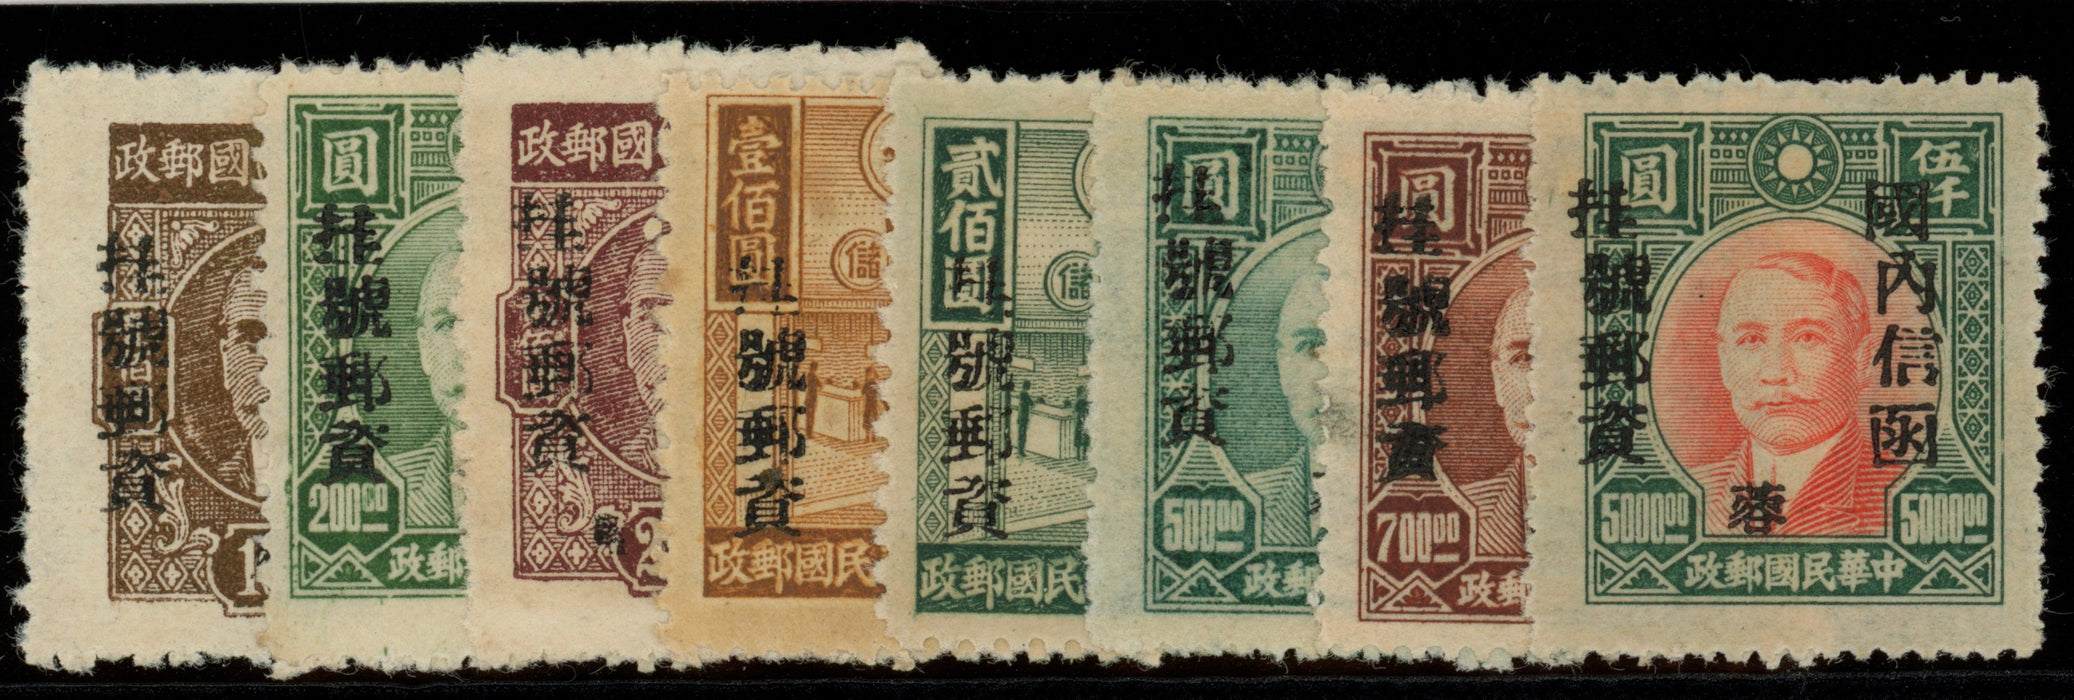 China 1949 Szechwan Province set of 8 to $5,000 vermilion and green, SG1270/77